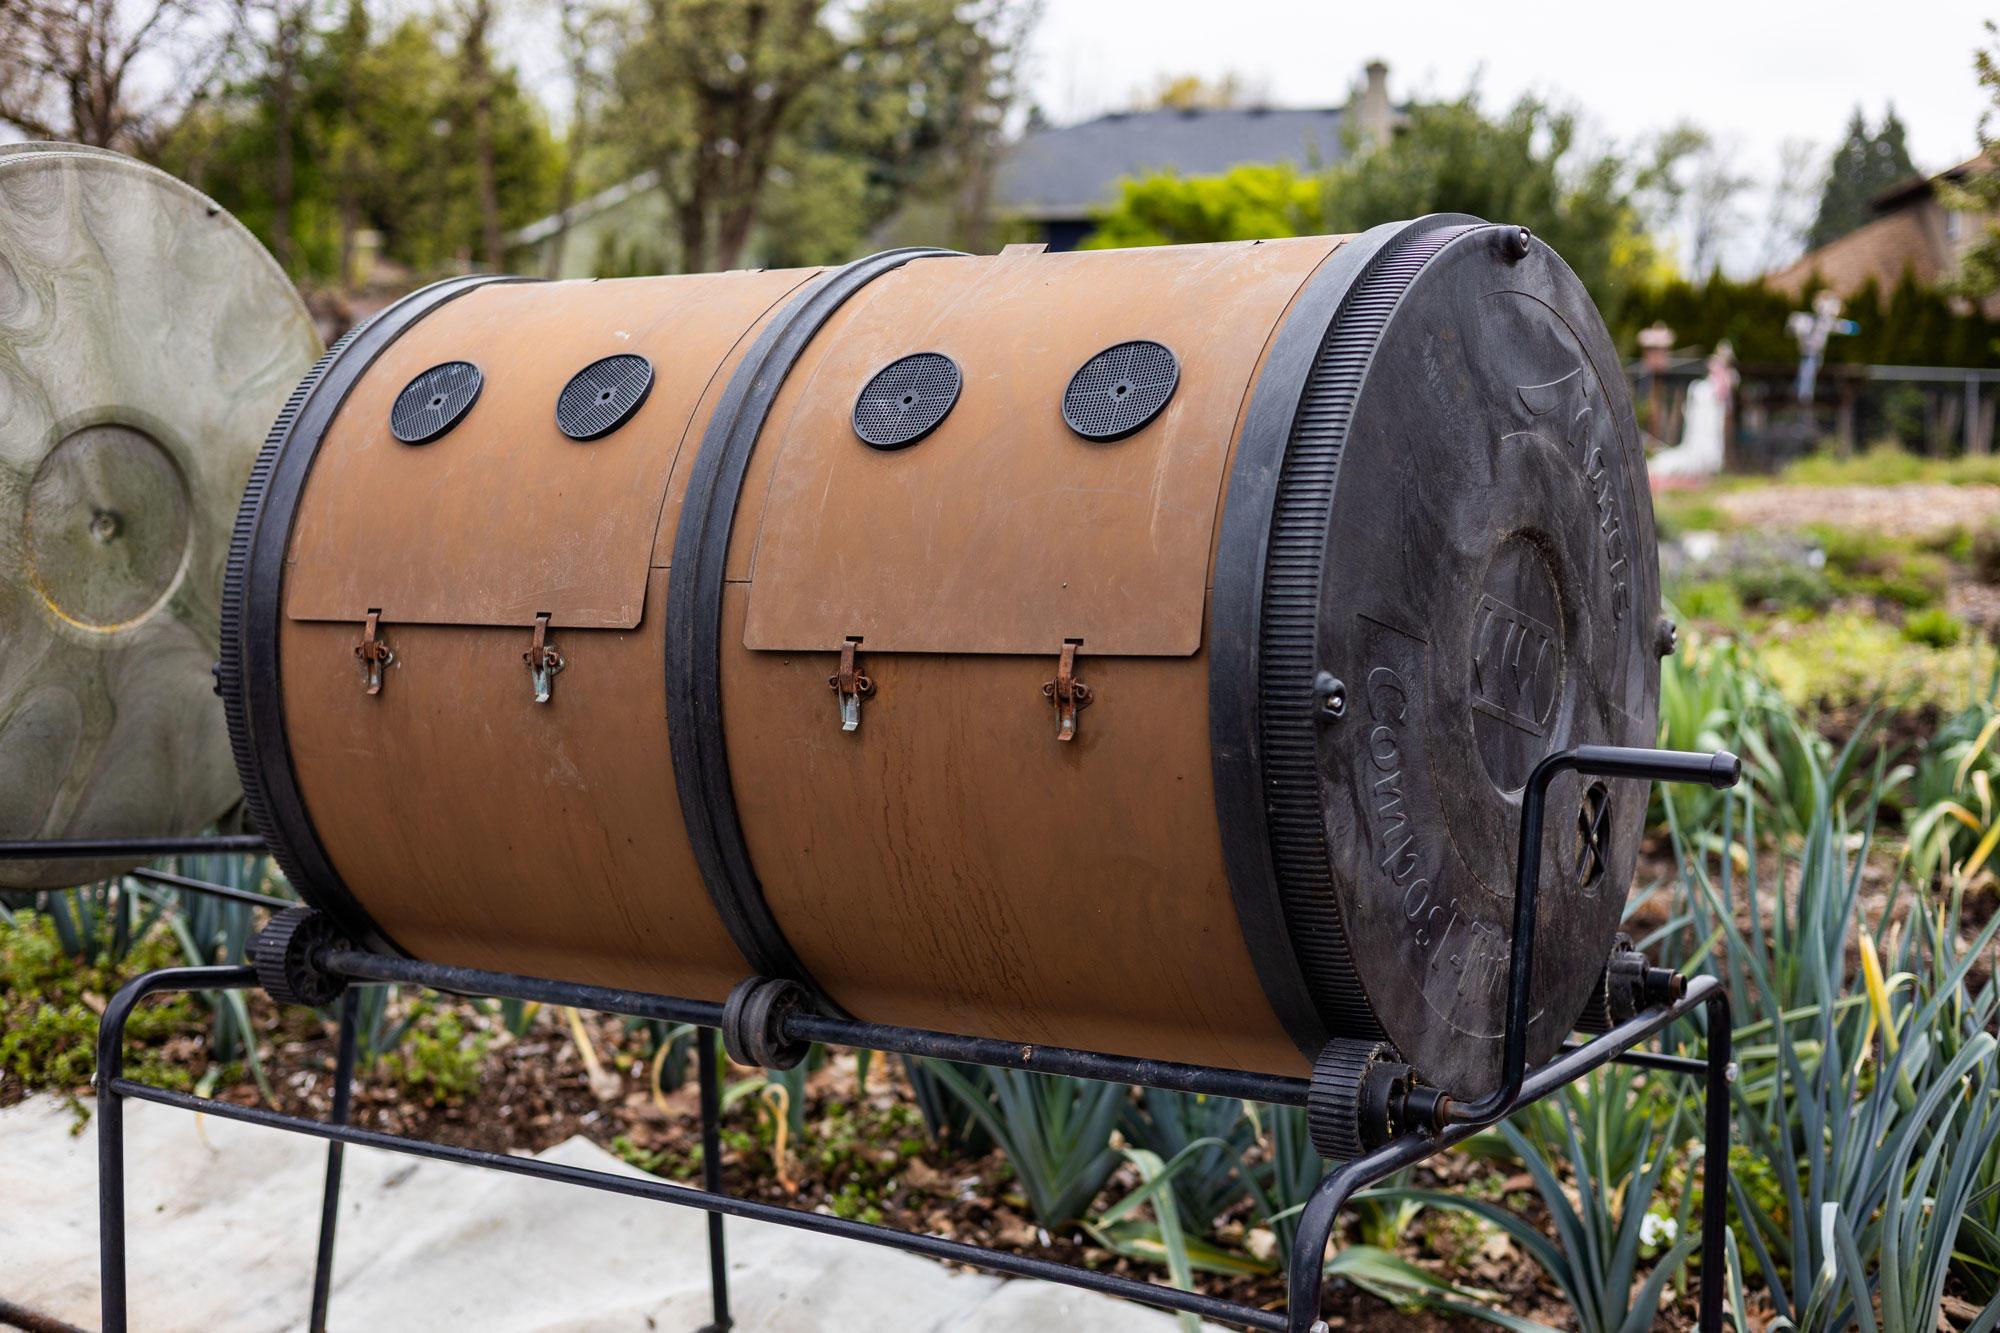 Consider the sturdiness of the mechanics that allow the composter to tumble.